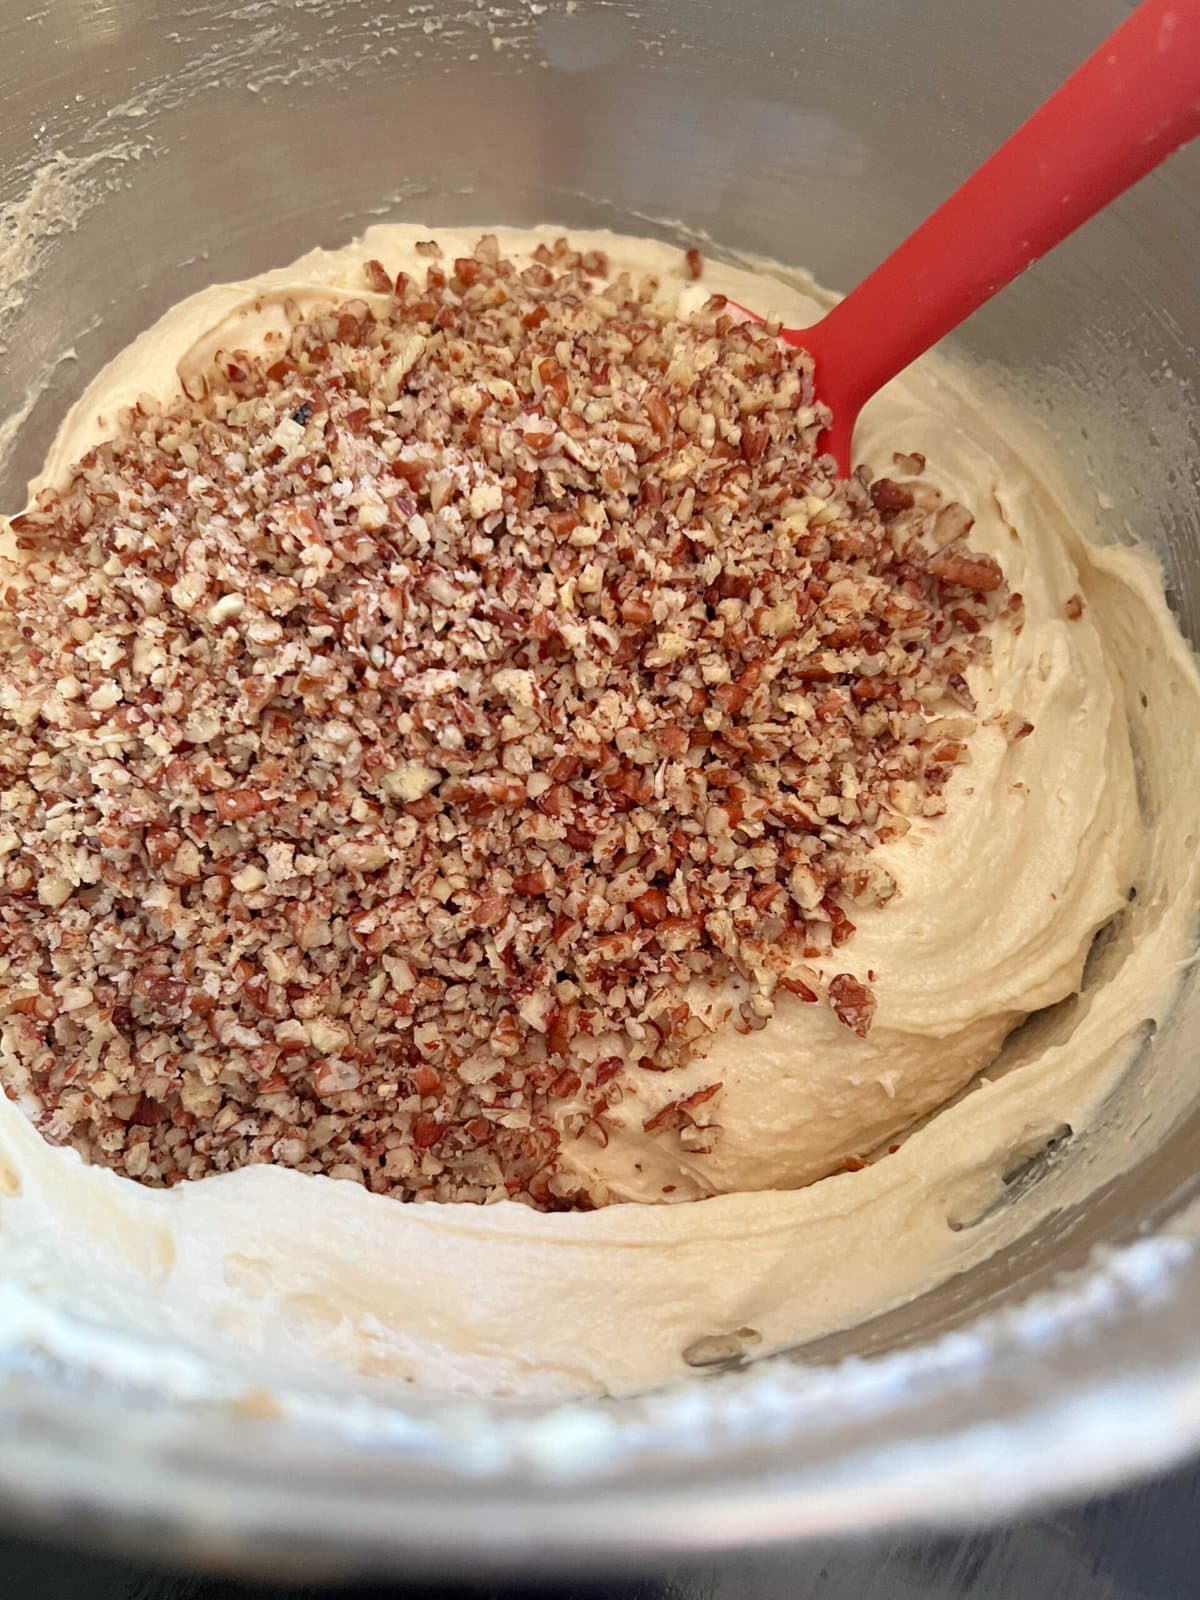 Stirring chopped buttered pecans into cake batter.